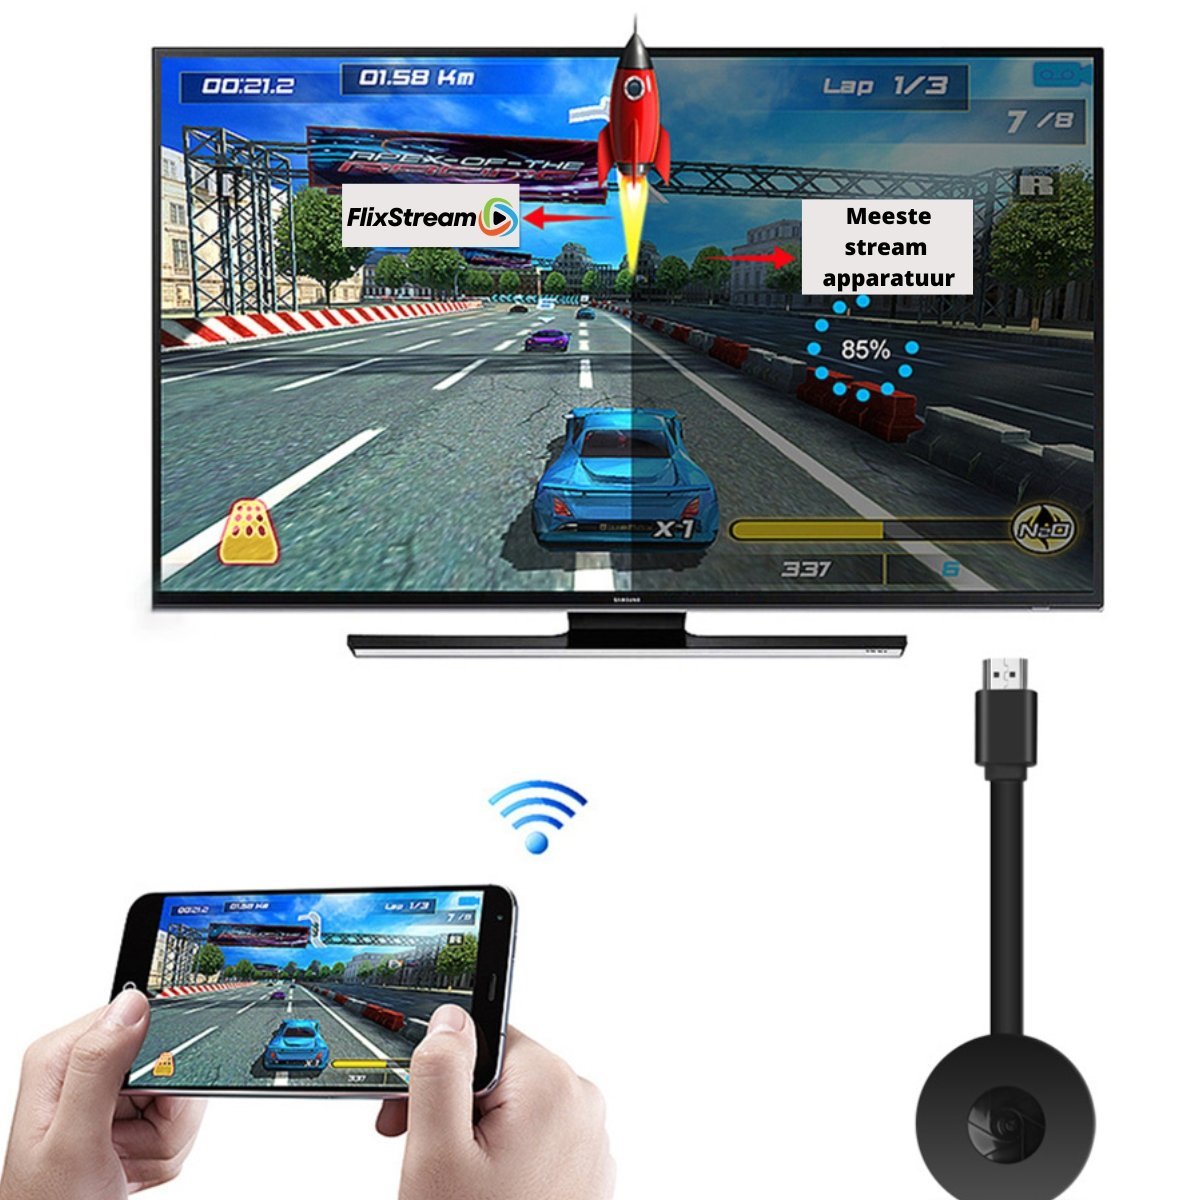 FlixStream™ | Full-HD streaming from all your devices wirelessly!